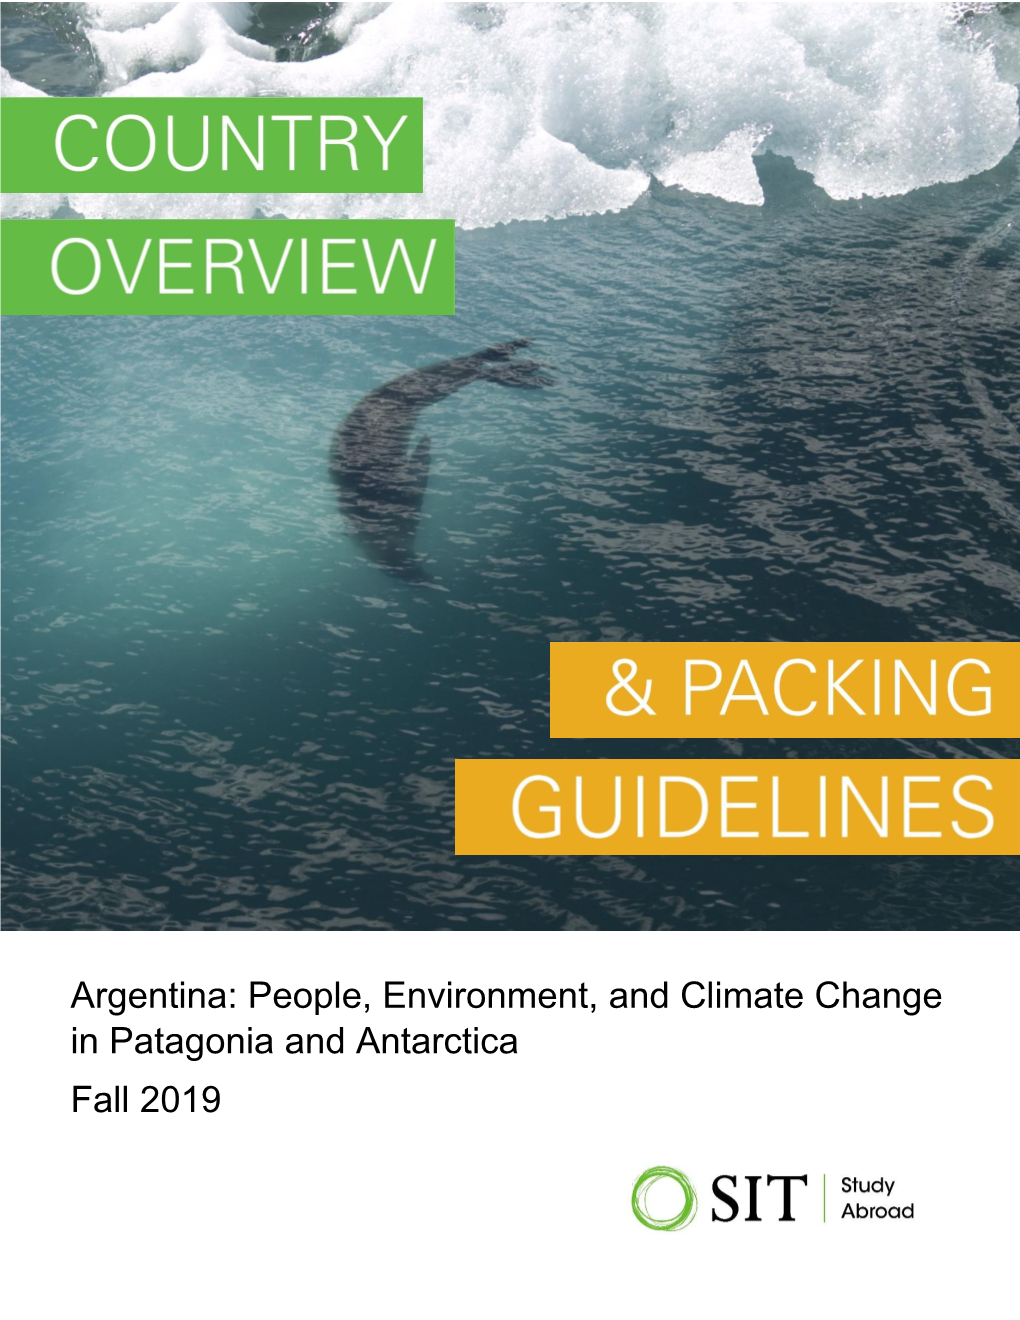 Argentina: People, Environment, and Climate Change in Patagonia and Antarctica Fall 2019